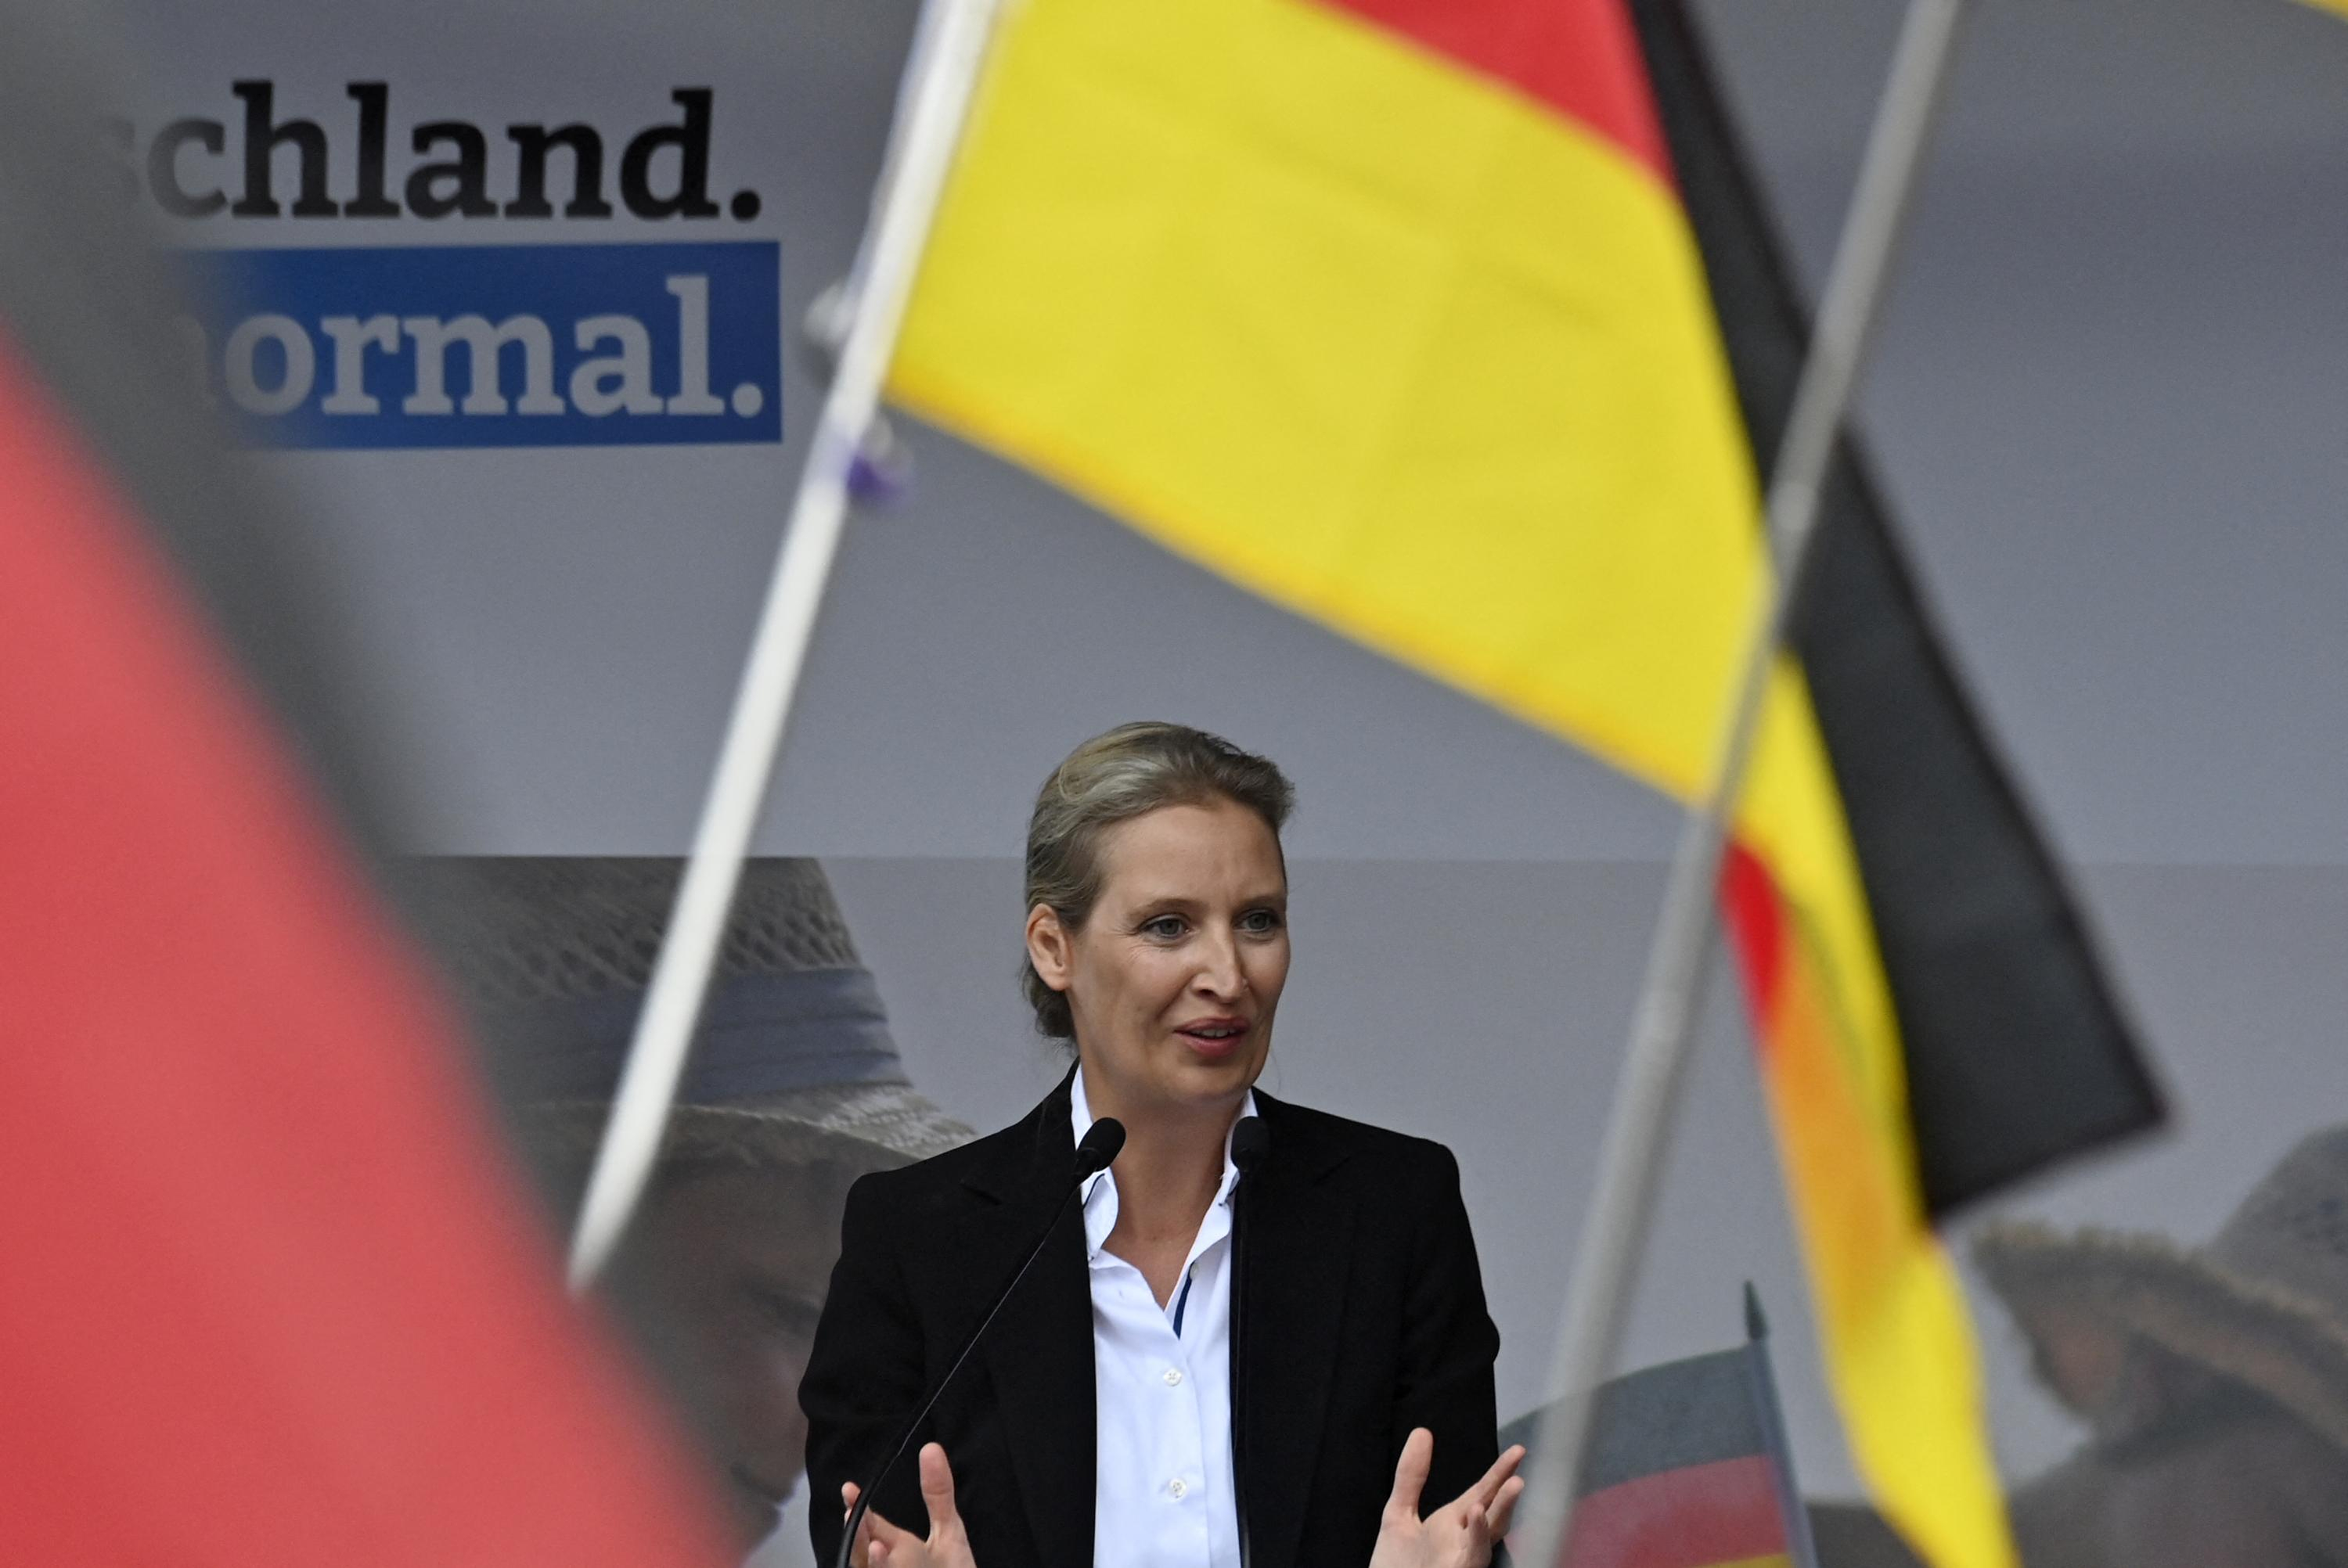 In Germany, the AfD is now the second political force in the country according to polls